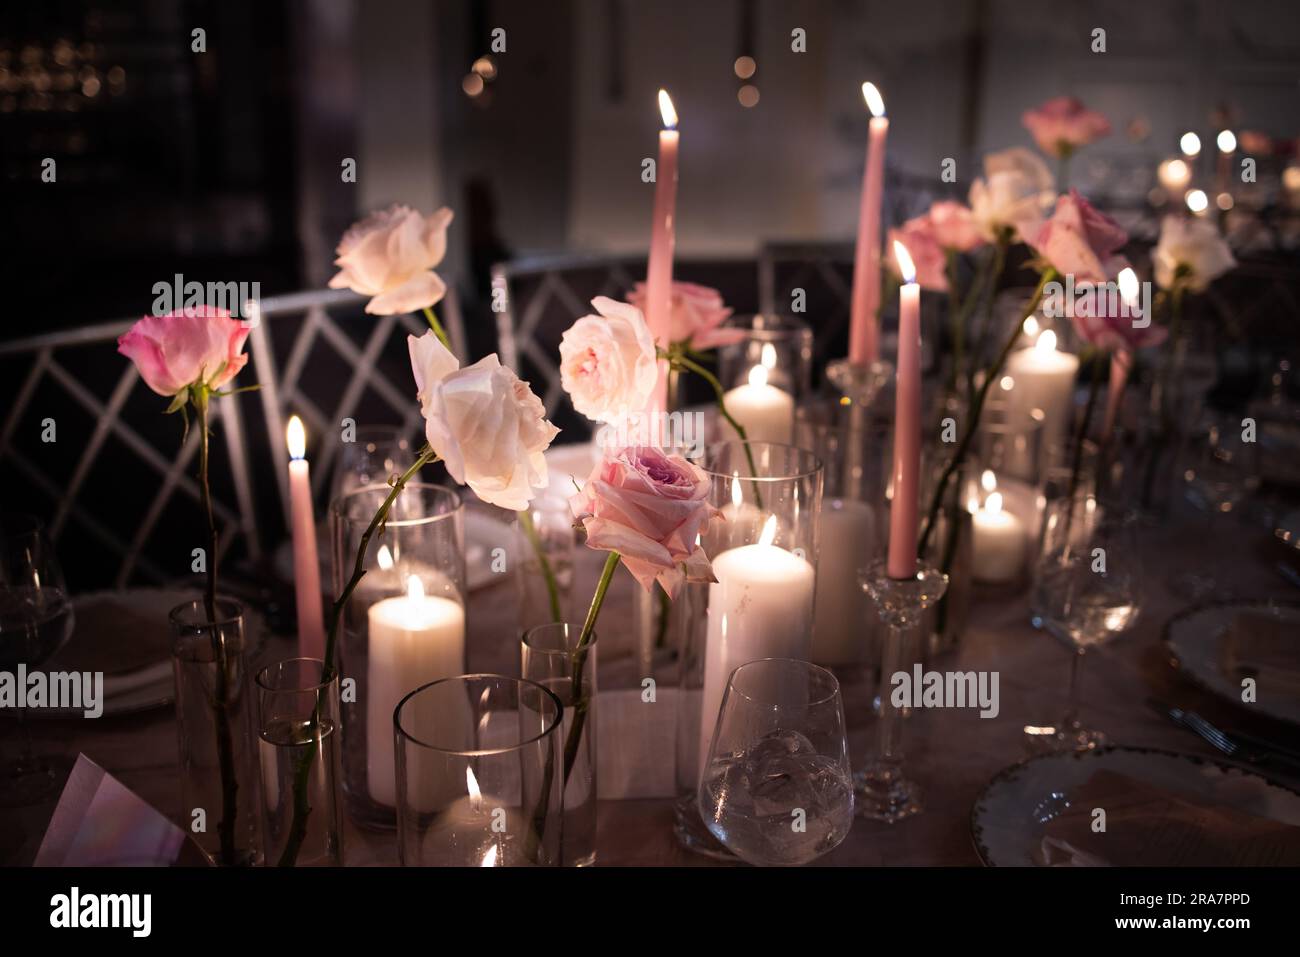 Chivalric wedding with pillars of candles and roses in glass vases. Lush garden arrangements decorating pillars by chairs. Tableware settings + bokeh. Stock Photo